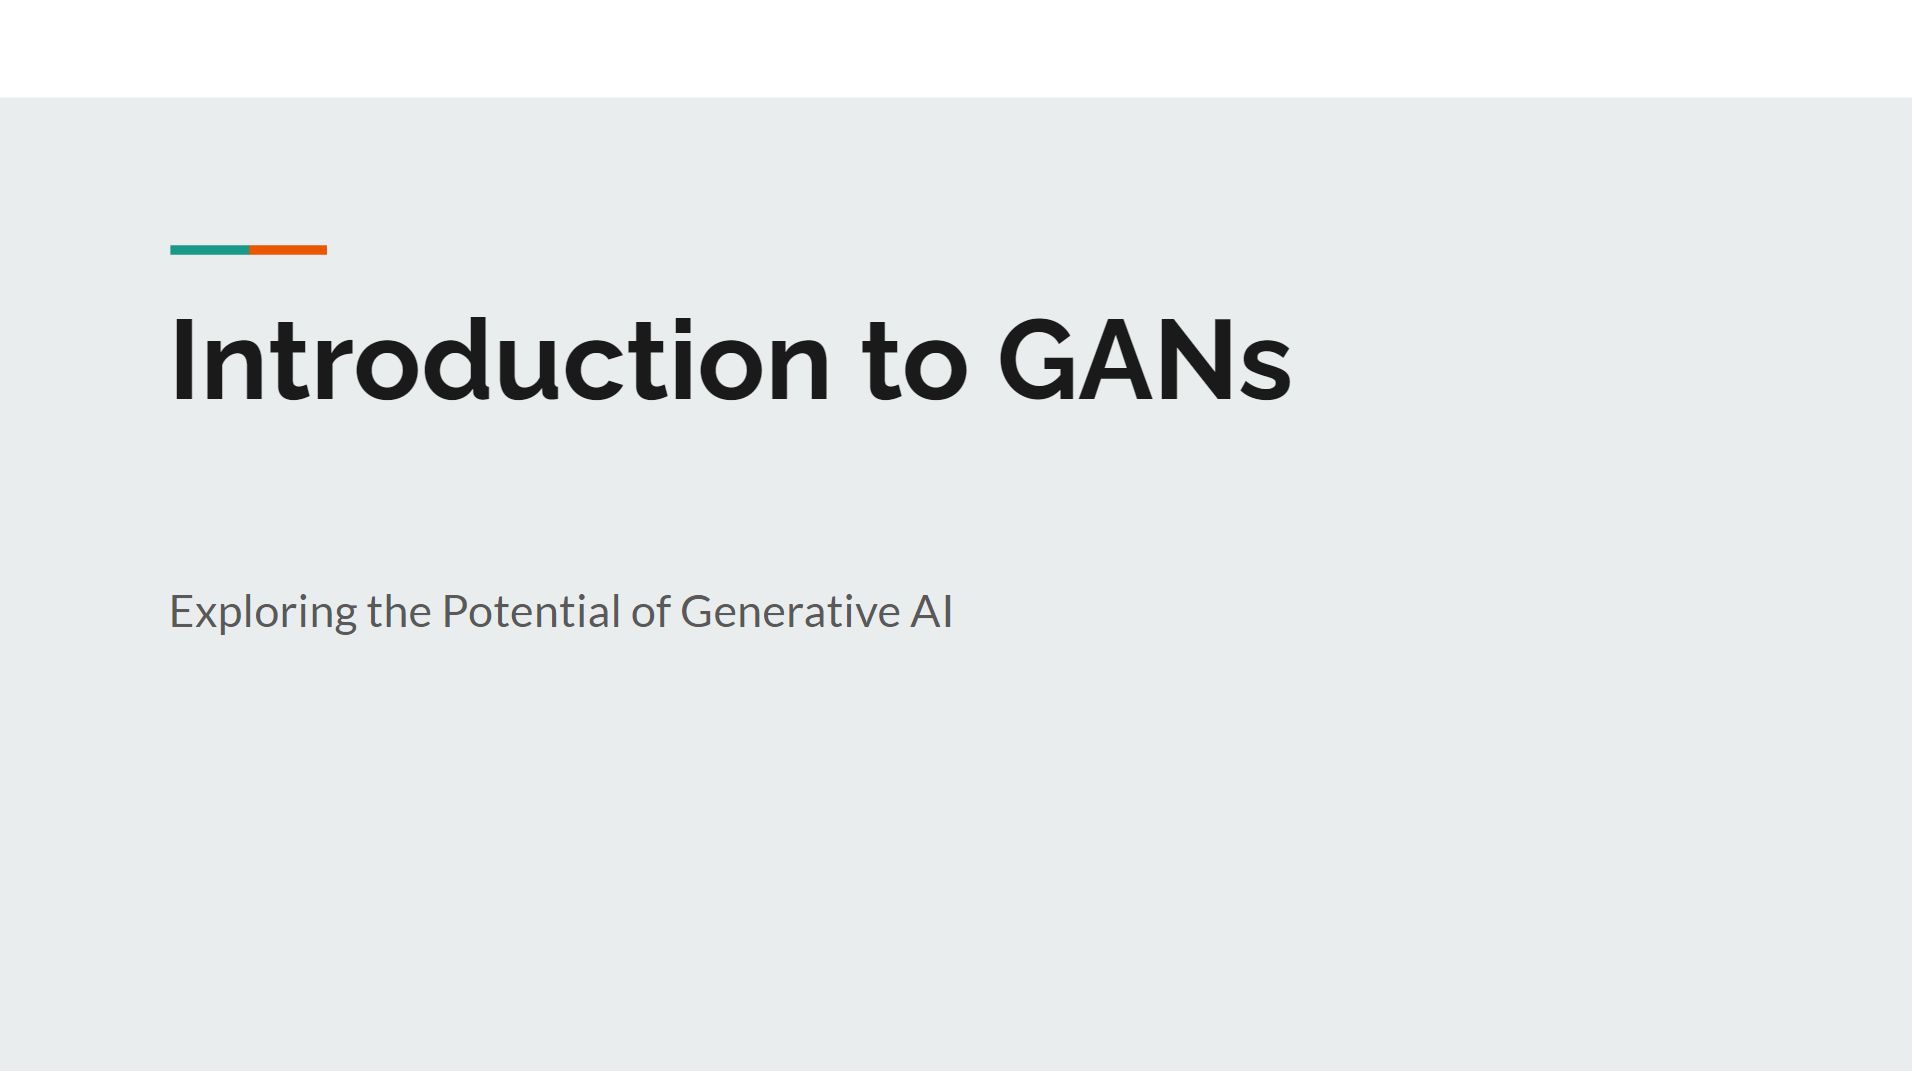 Introduction to GANs - Exploring the Potential of Generative AI